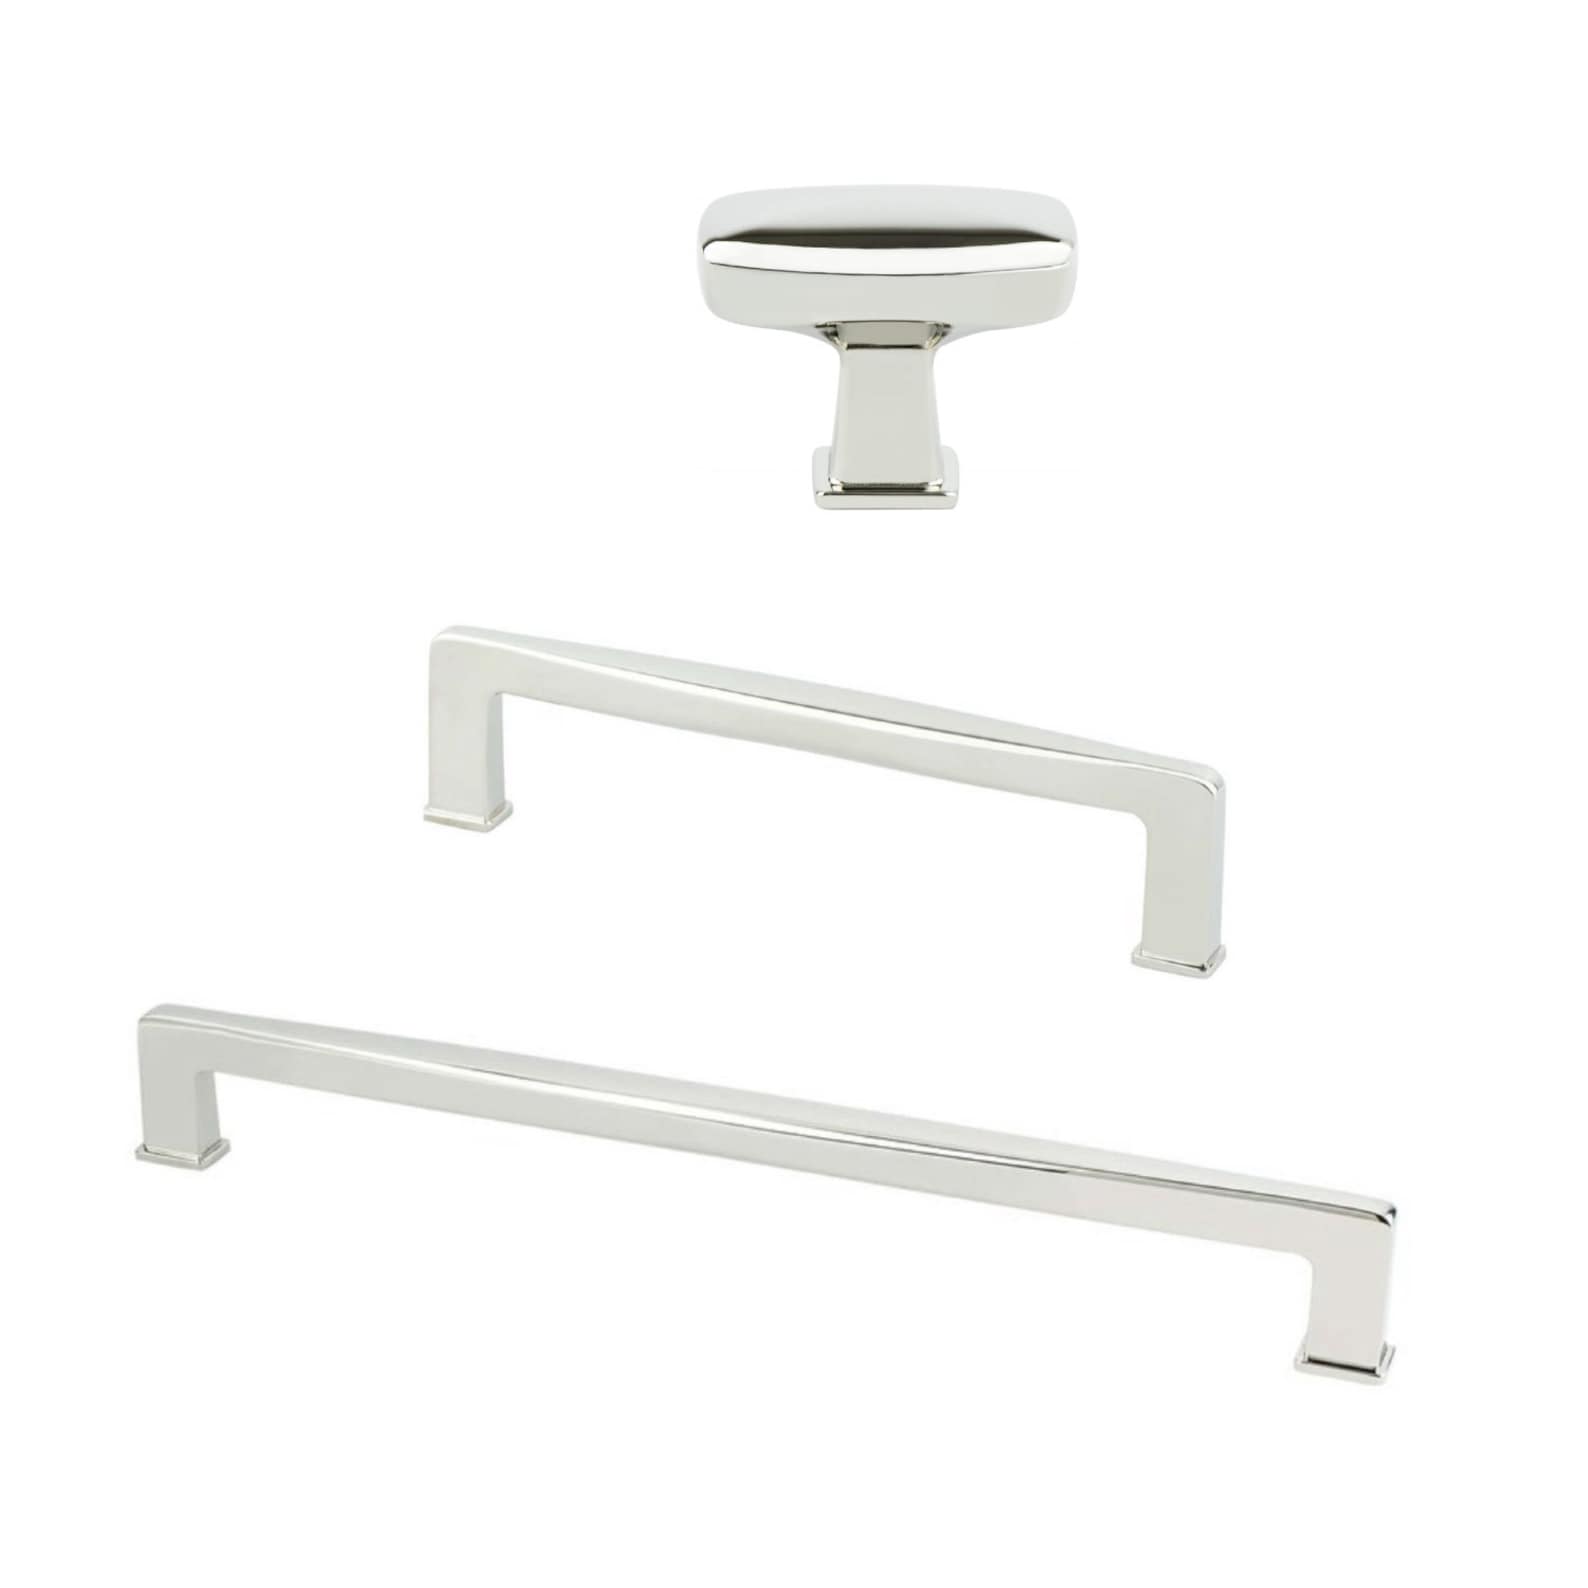 Kelly No.1 Polished Nickel Cabinet Knobs and Drawer Pulls - Forge Hardware Studio